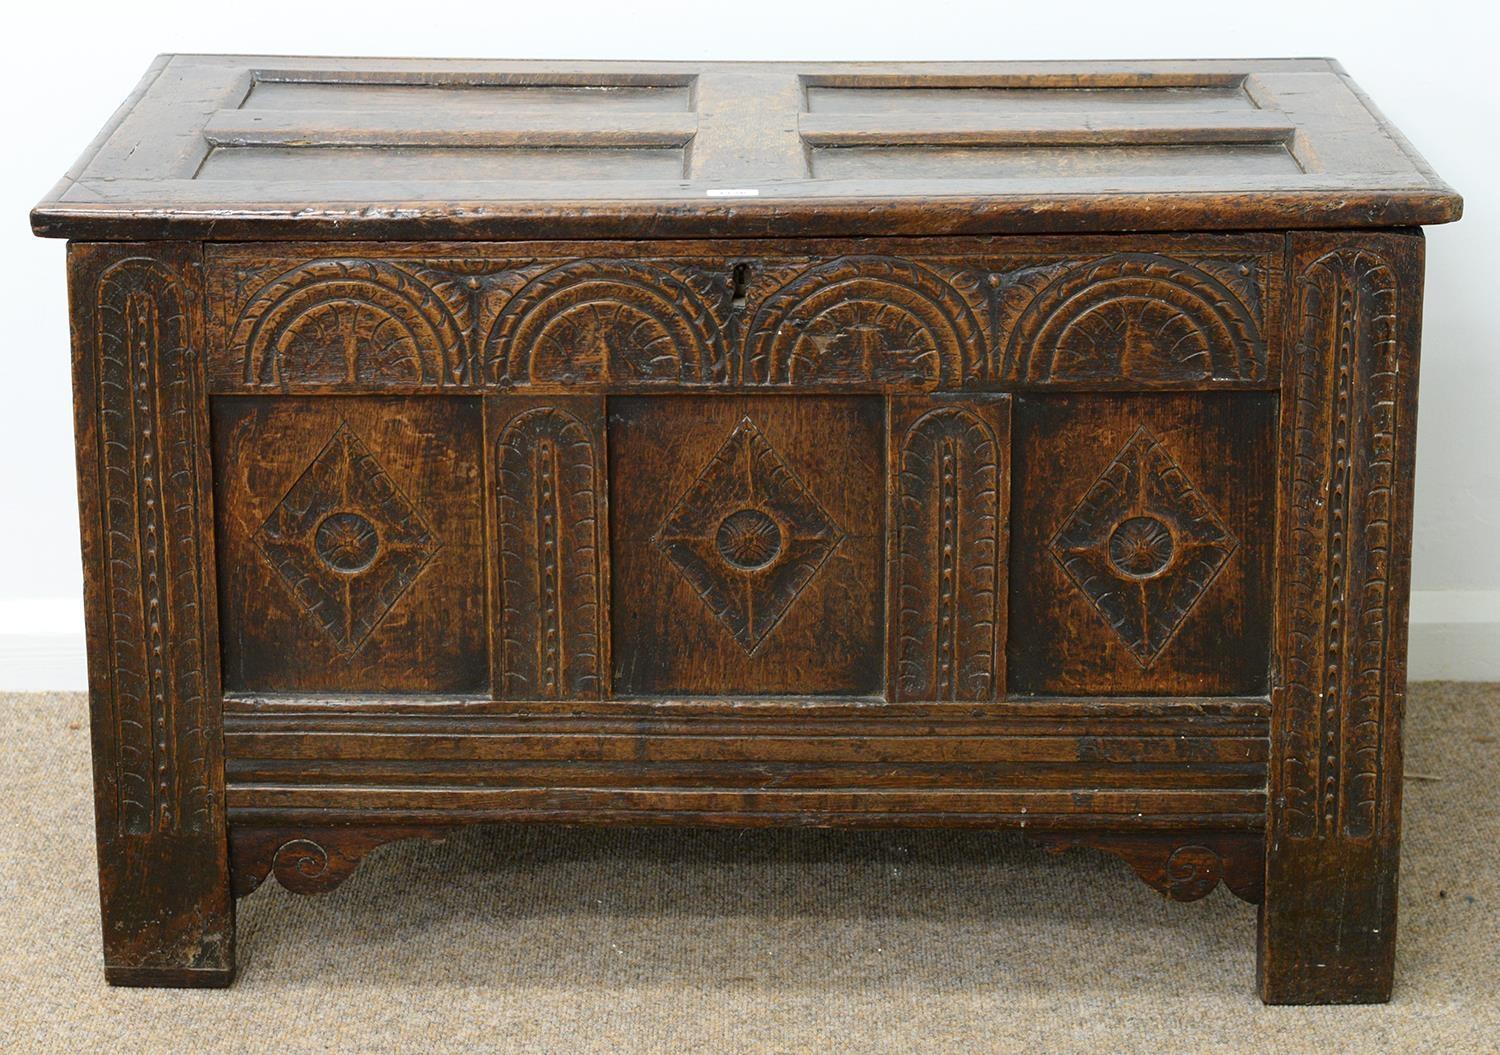 A CHARLES II JOINED OAK CHEST, LATE 17TH C, THE THREE PANEL FRONT CARVED AT LATER DATE WITH LUNETTES